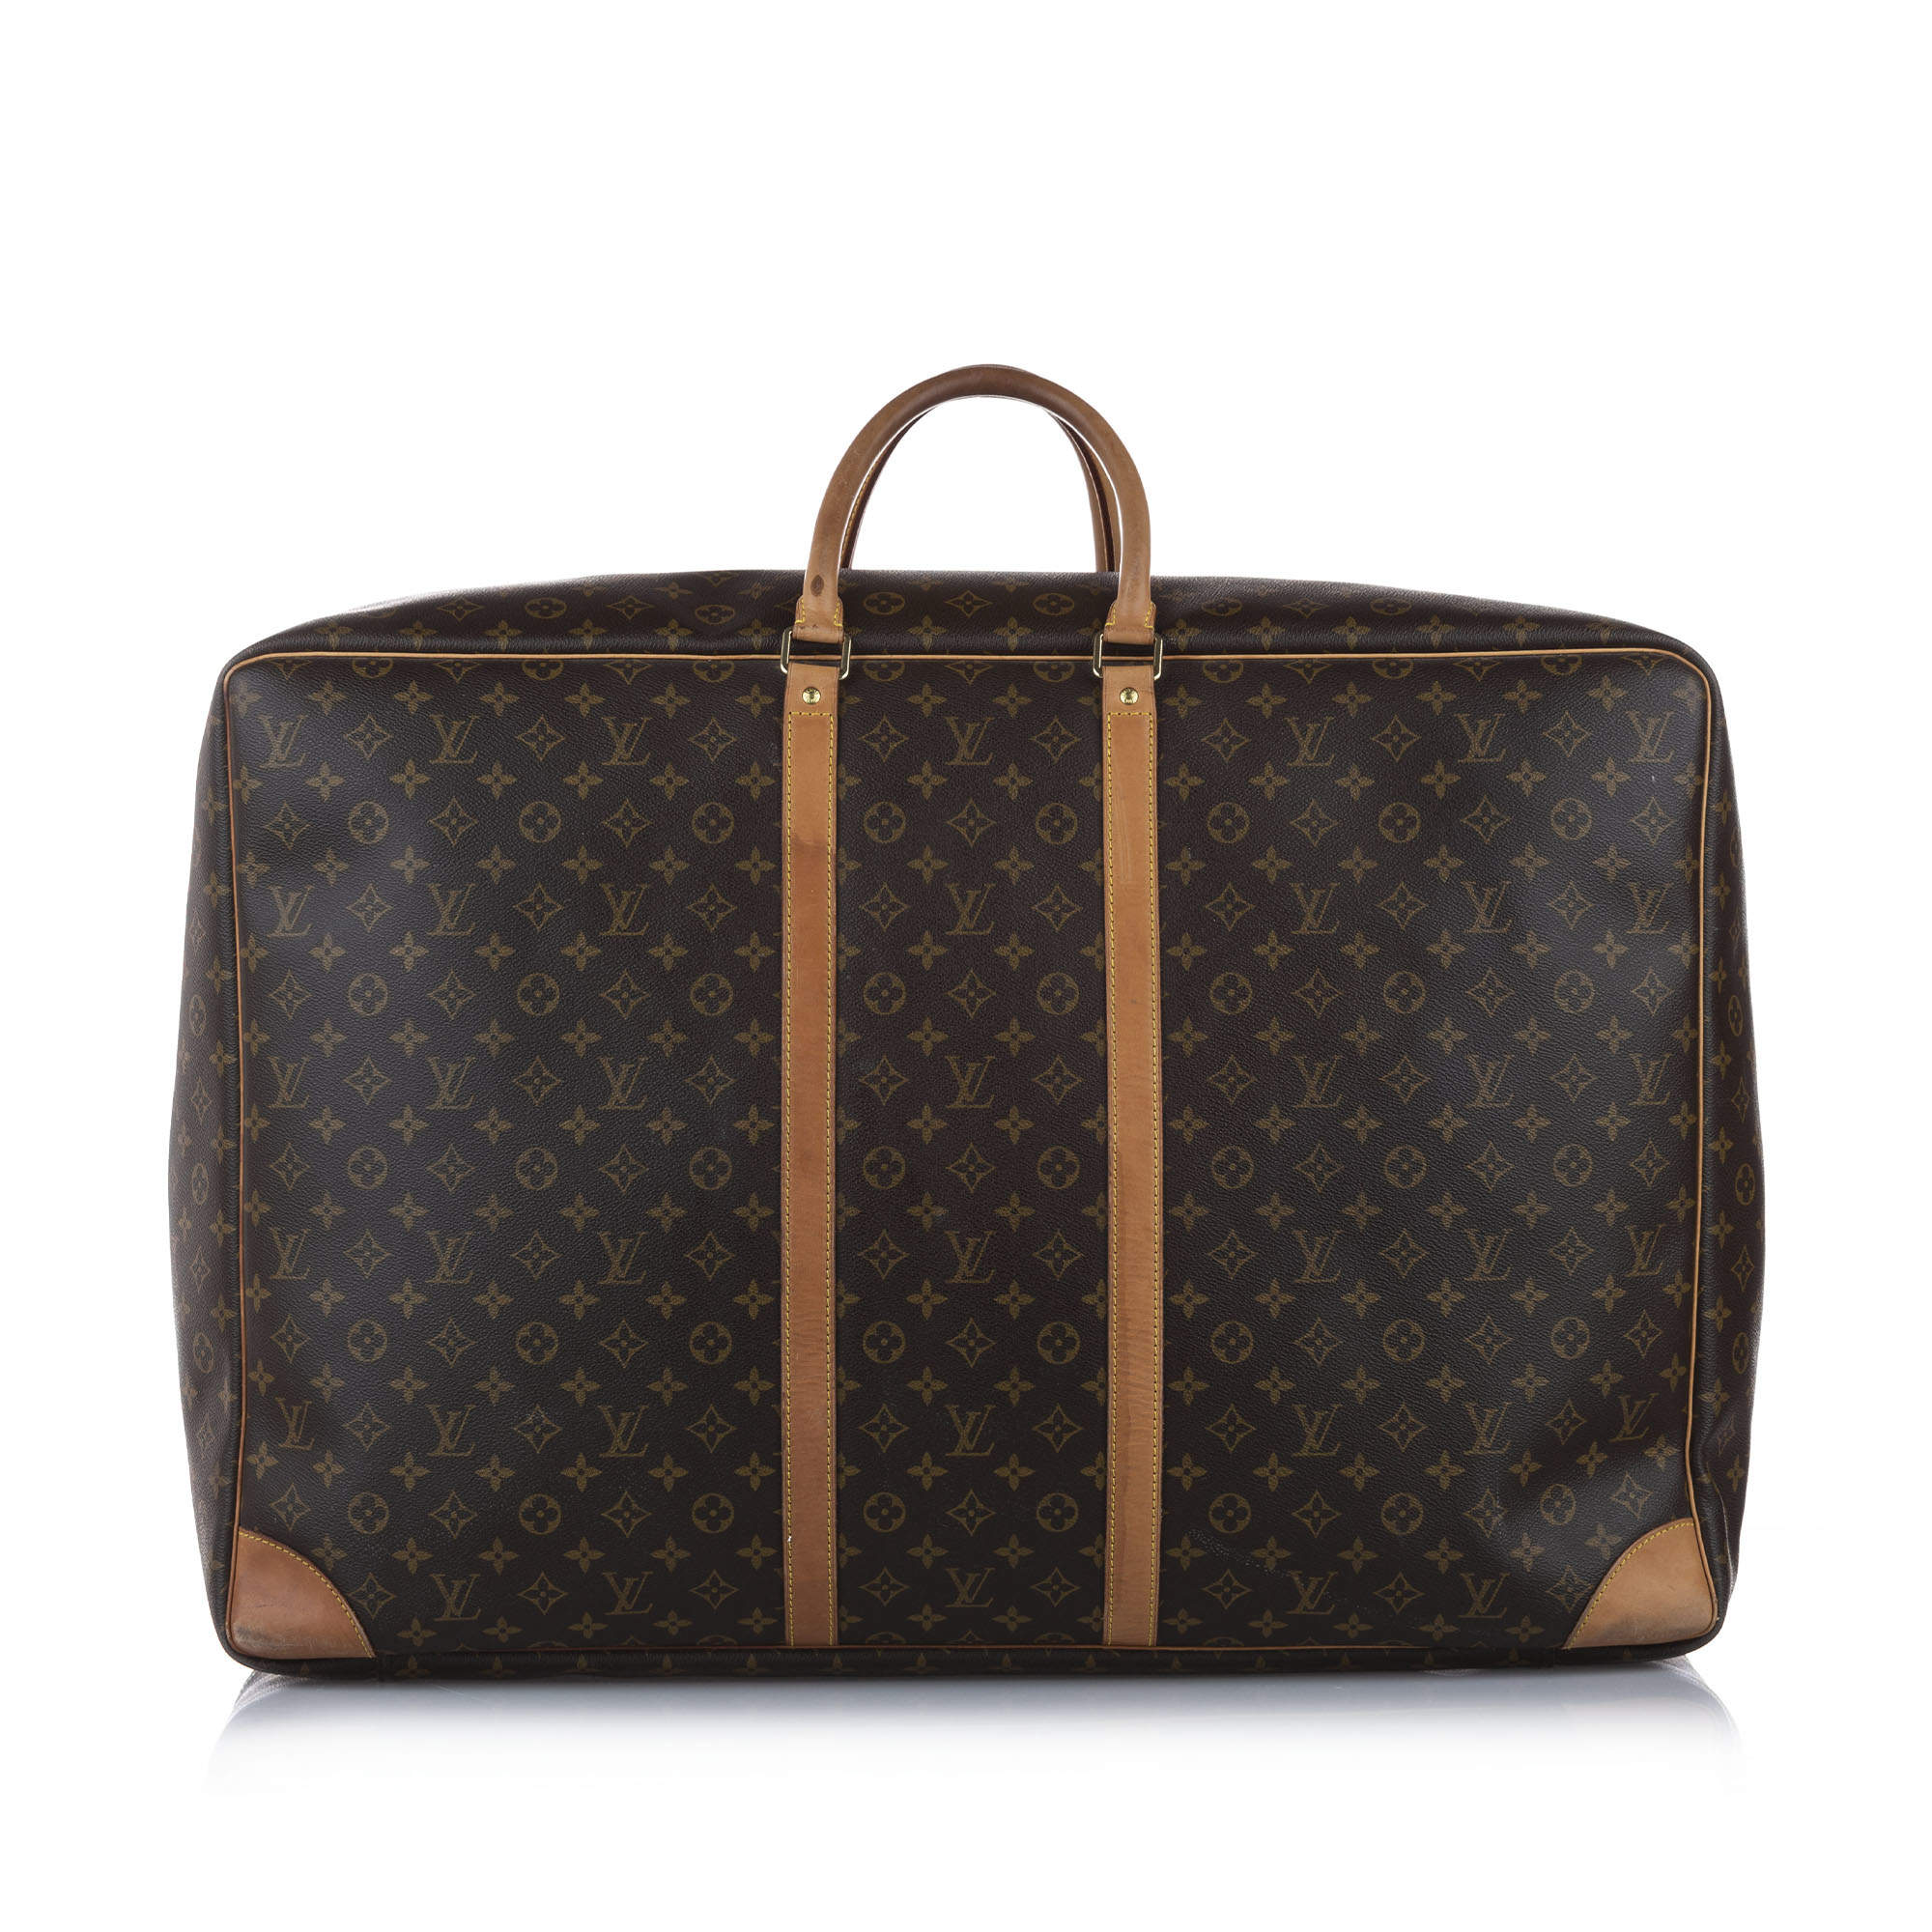 Louis Vuitton Sirius 70 Luggage Authentic French Vintage for Sale